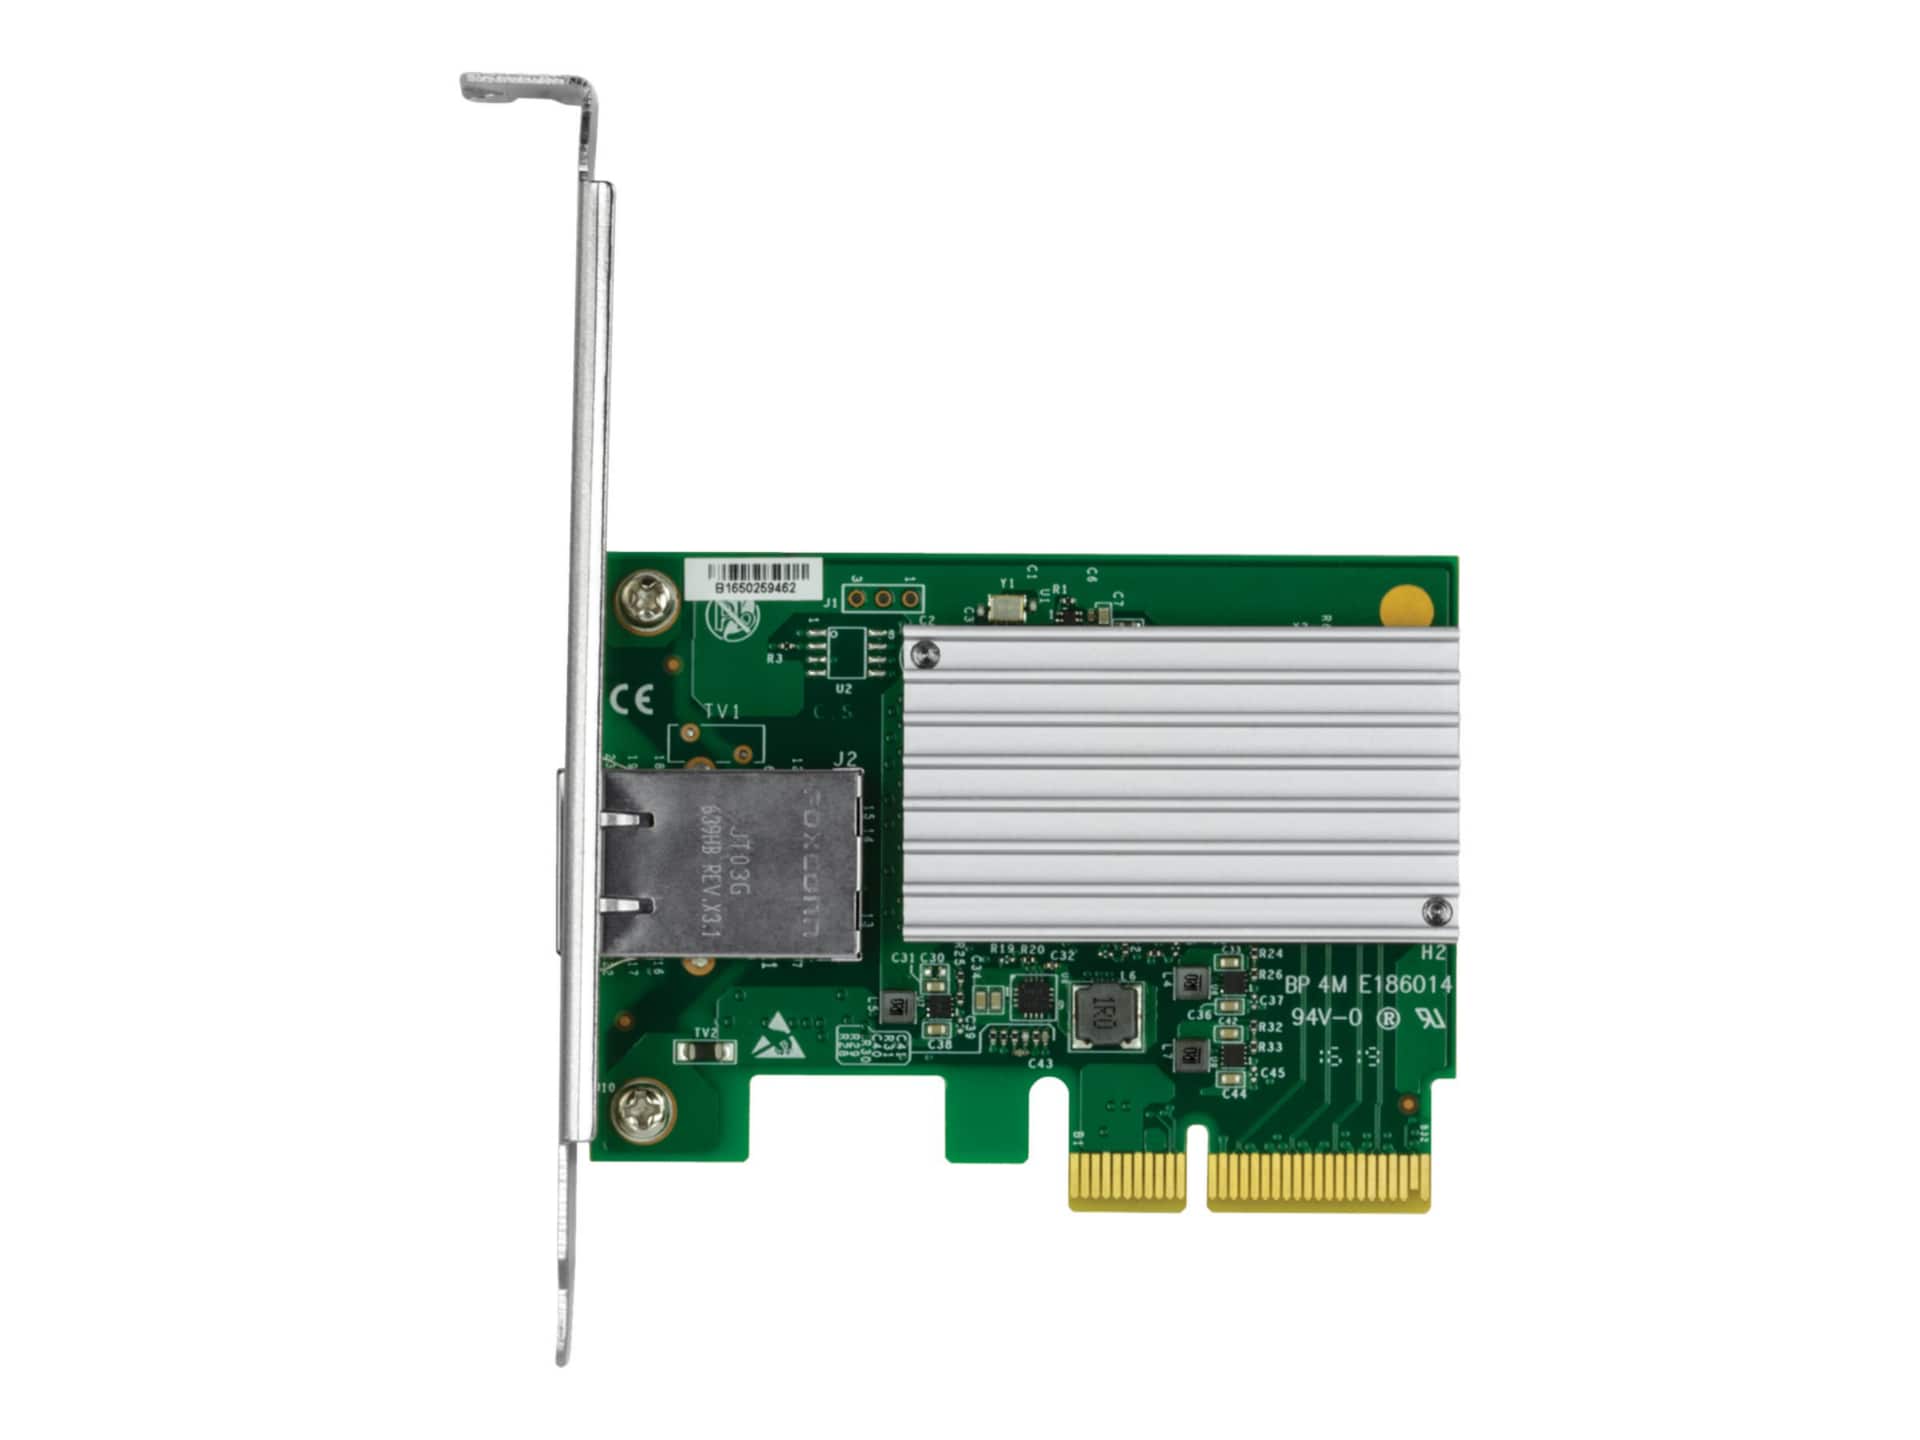 TRENDnet 10 Gigabit PCIe Network Adapter, Converts A PCIe Slot Into A 10G Ethernet Port, Supports 802.1Q Vlan, Includes